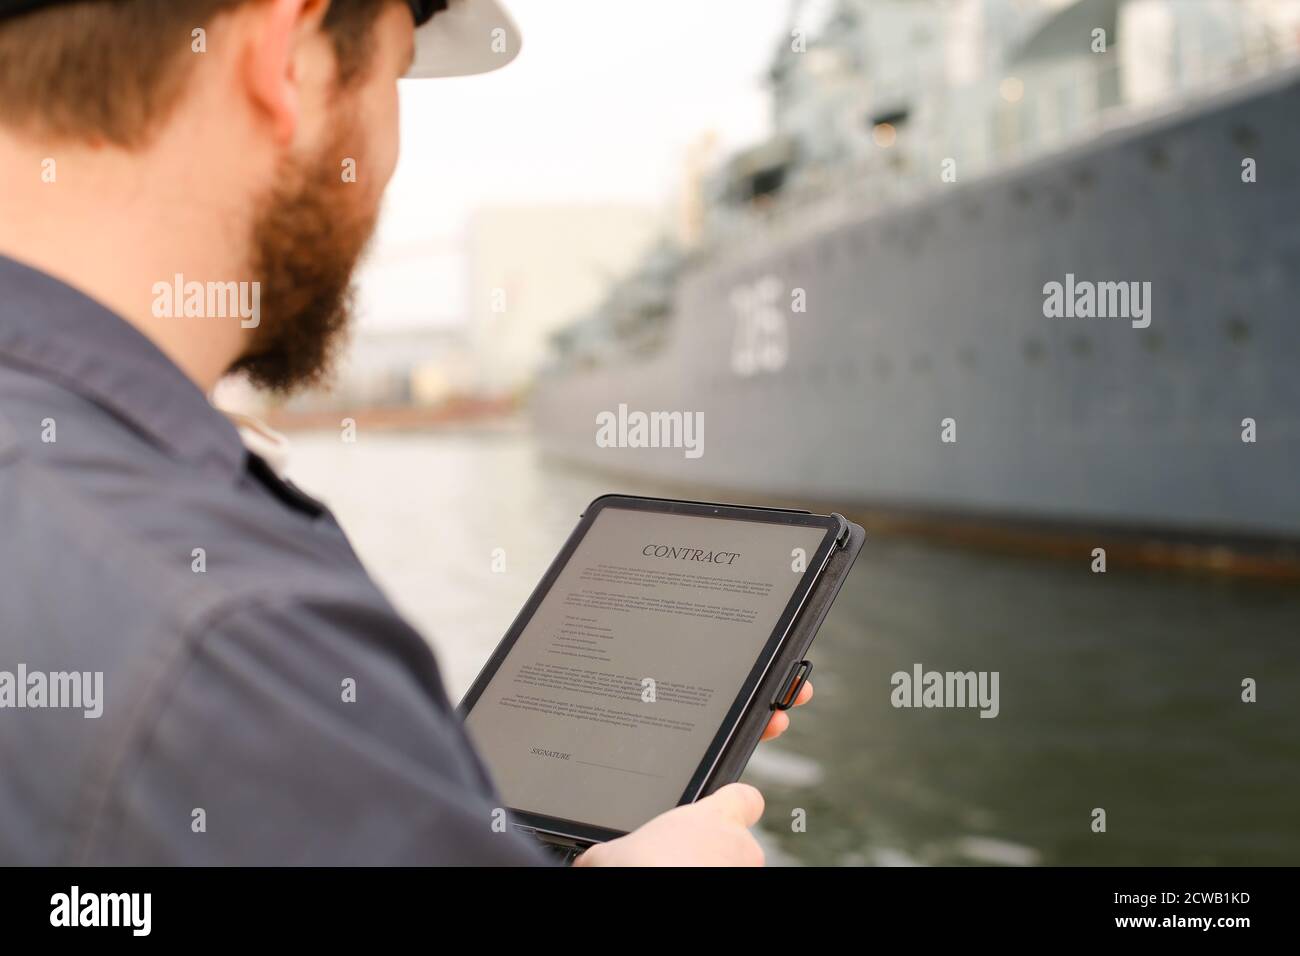 Navigation officer reading contract on tablet near vessel in background. Stock Photo